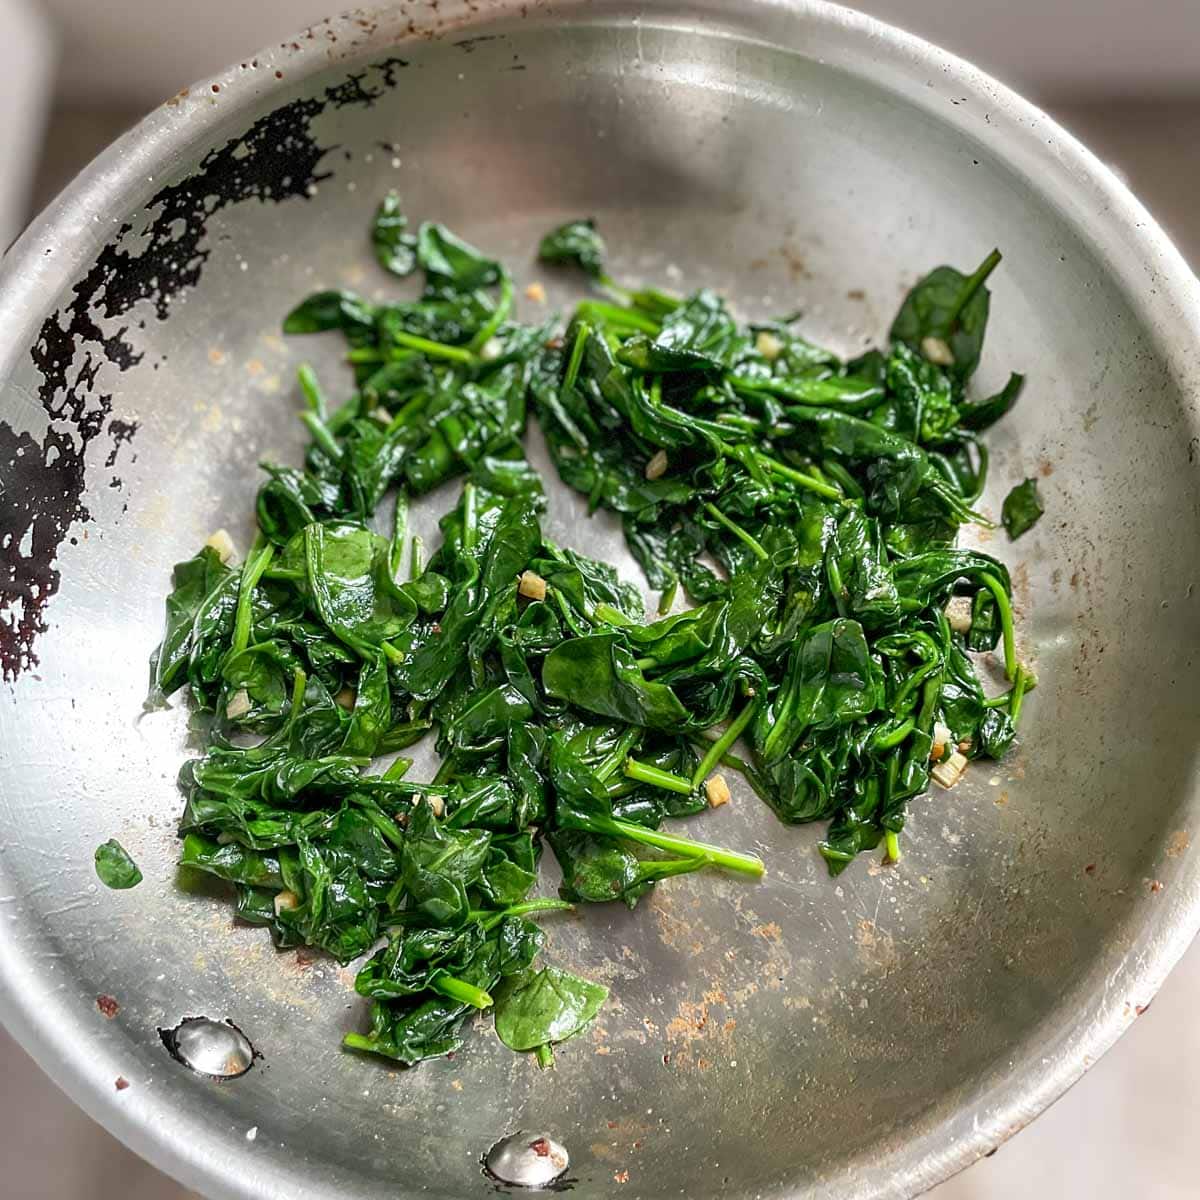 Sautéed spinach is shown in a pan.